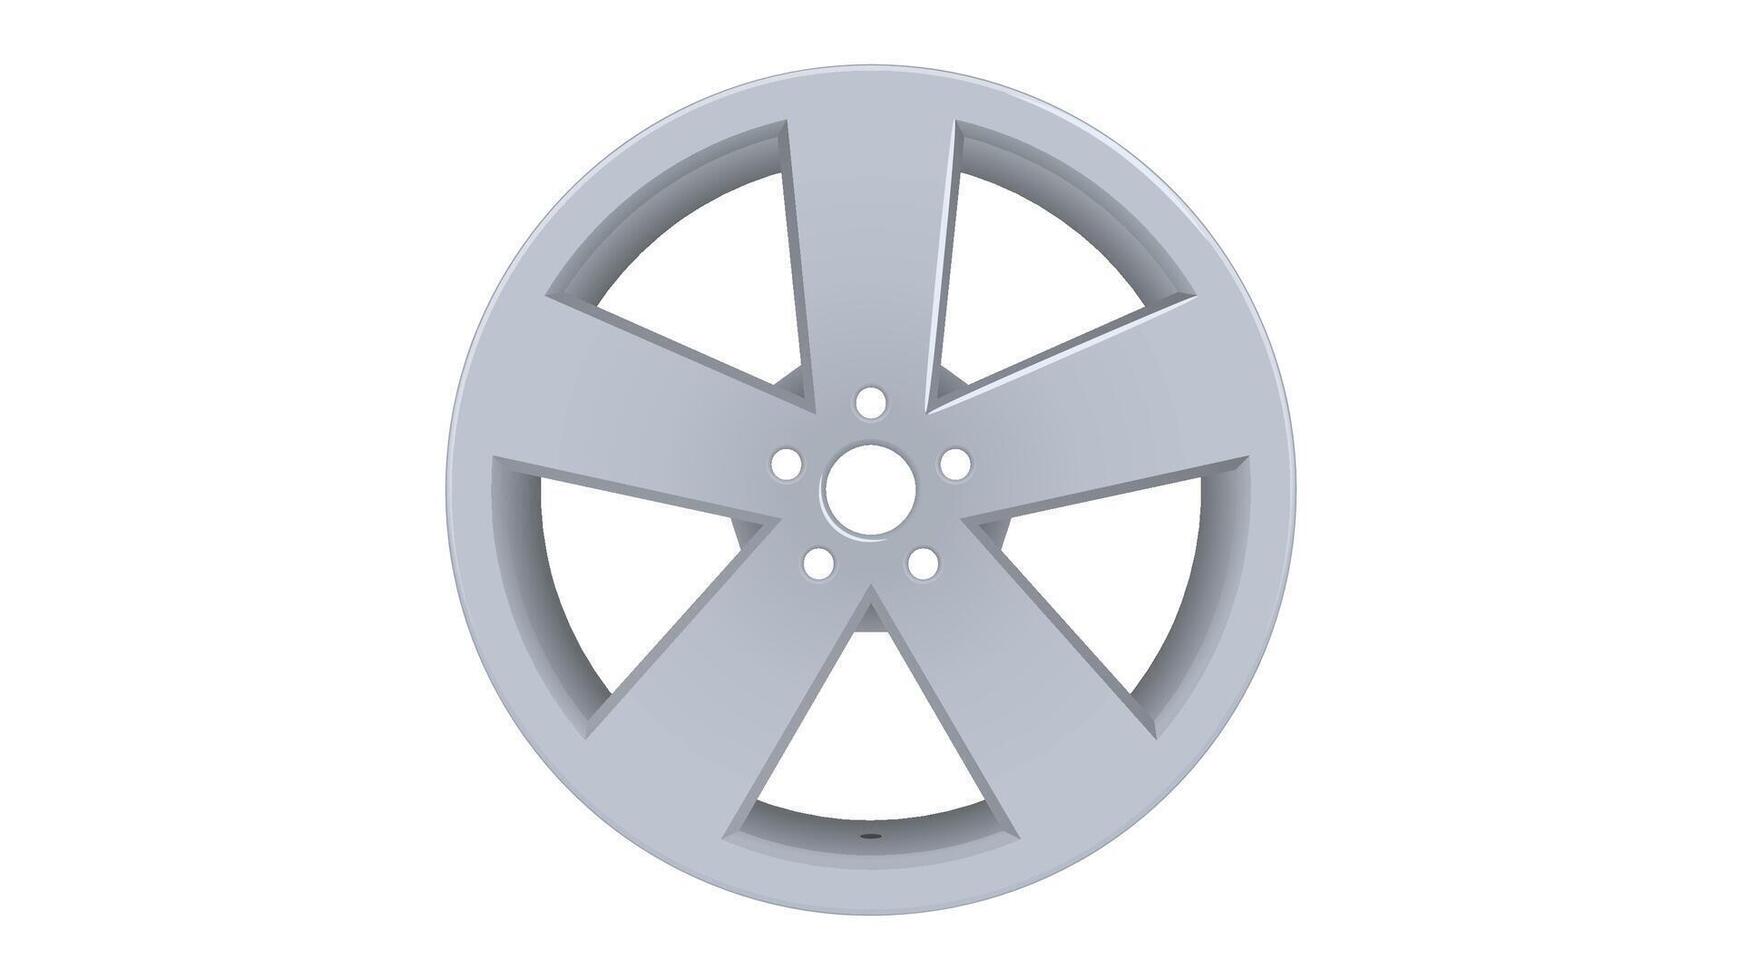 Chrome alloy car wheel disk  with five bolt holes isolated on white background vector